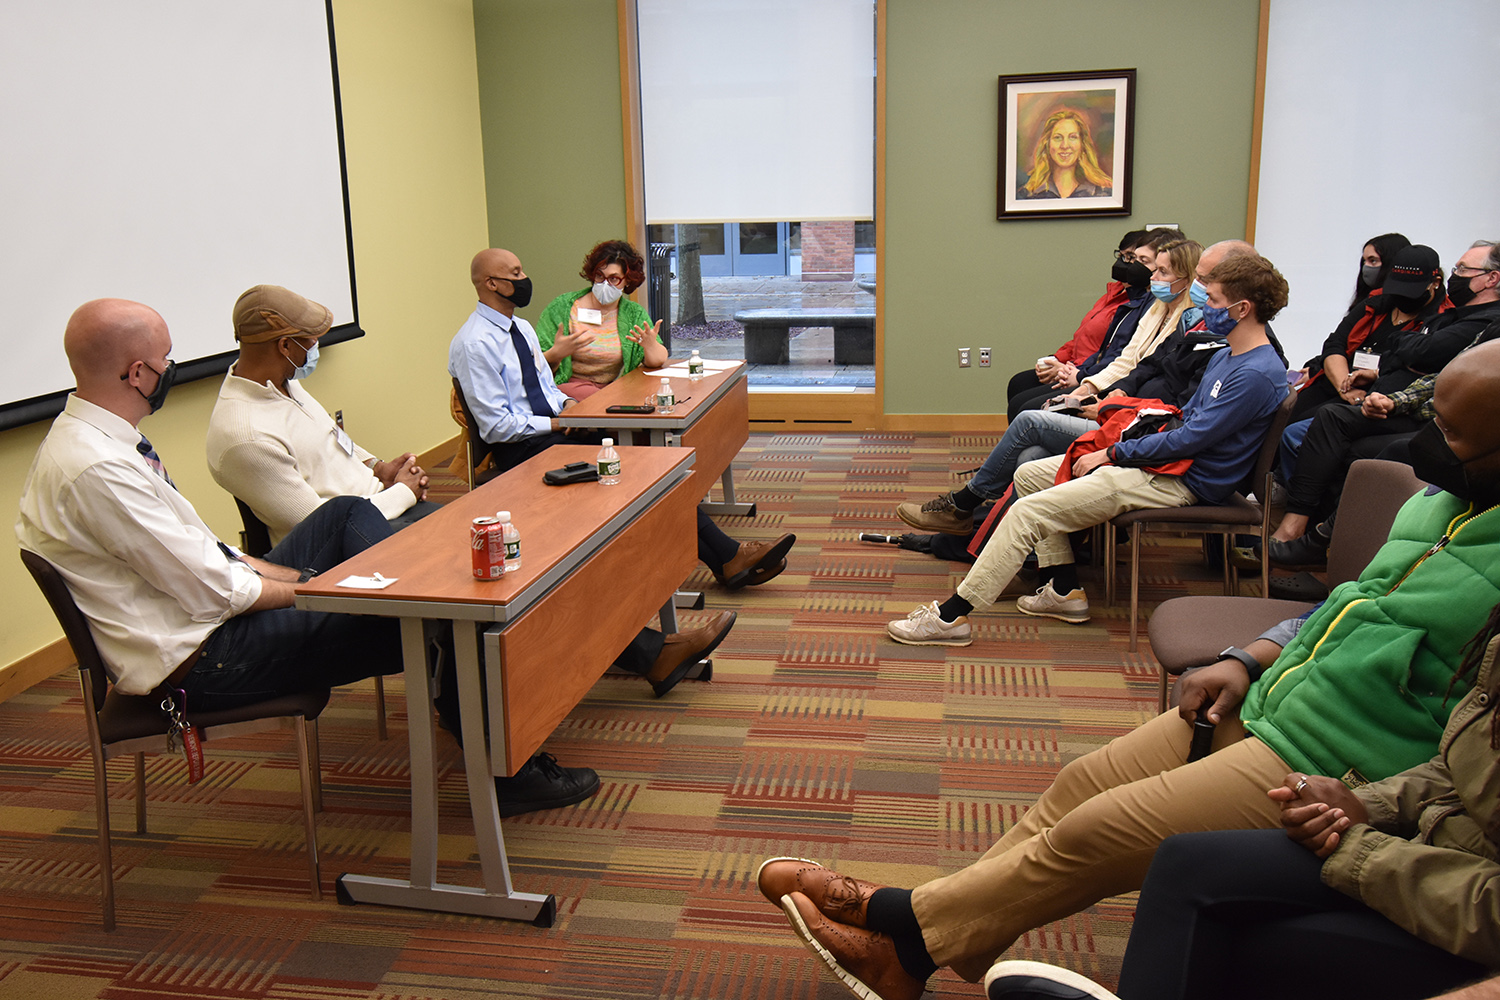 Graduates of Wesleyan's Center for Prison Education speak at a WESSeminar on Homecoming Weekend